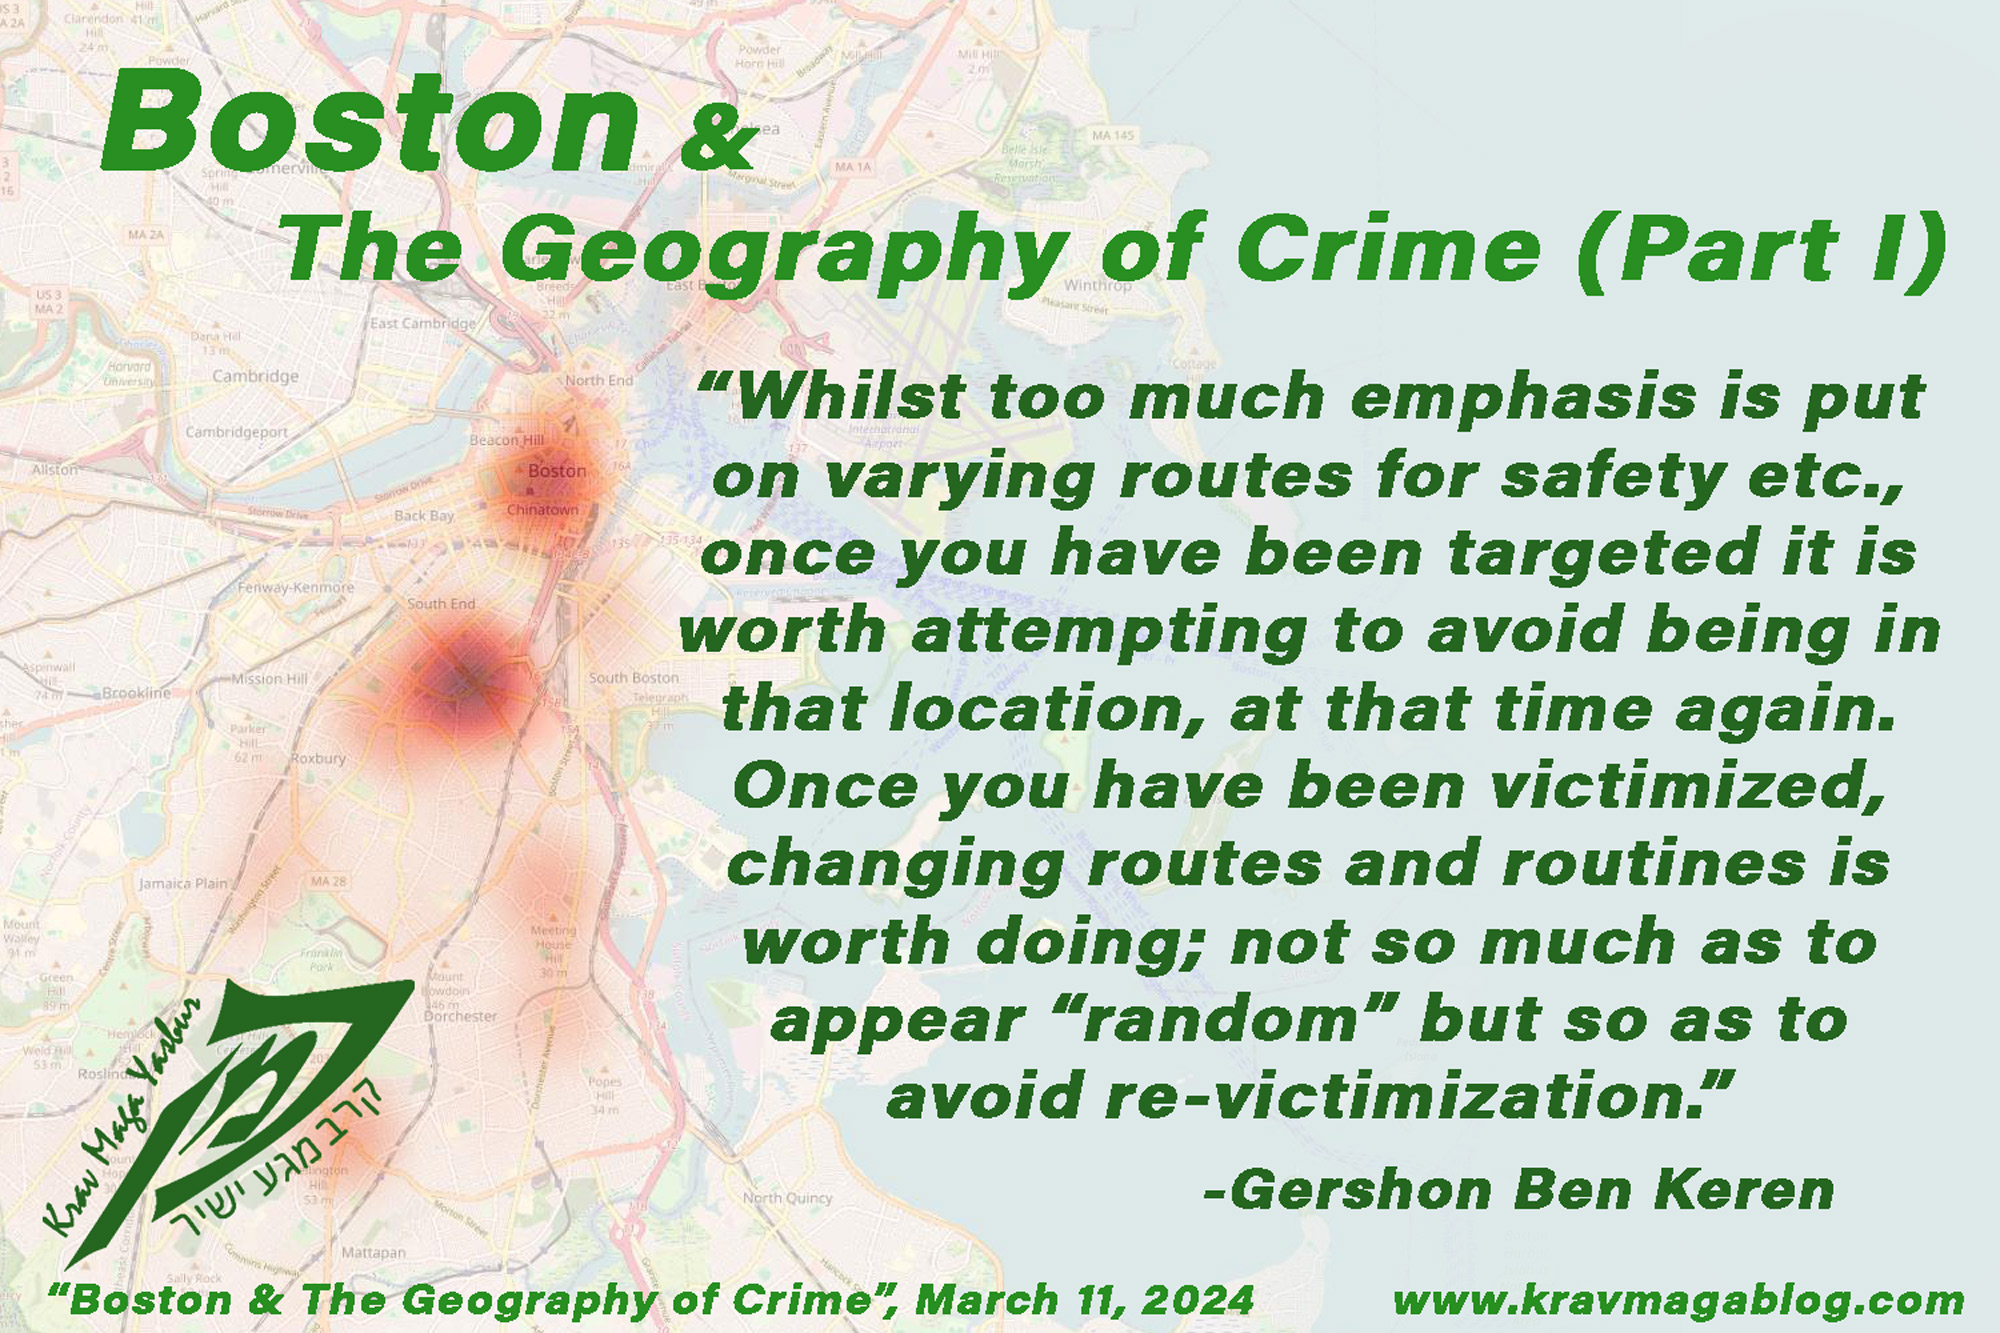 Blog About Boston & The Geography of Crime (Part One)